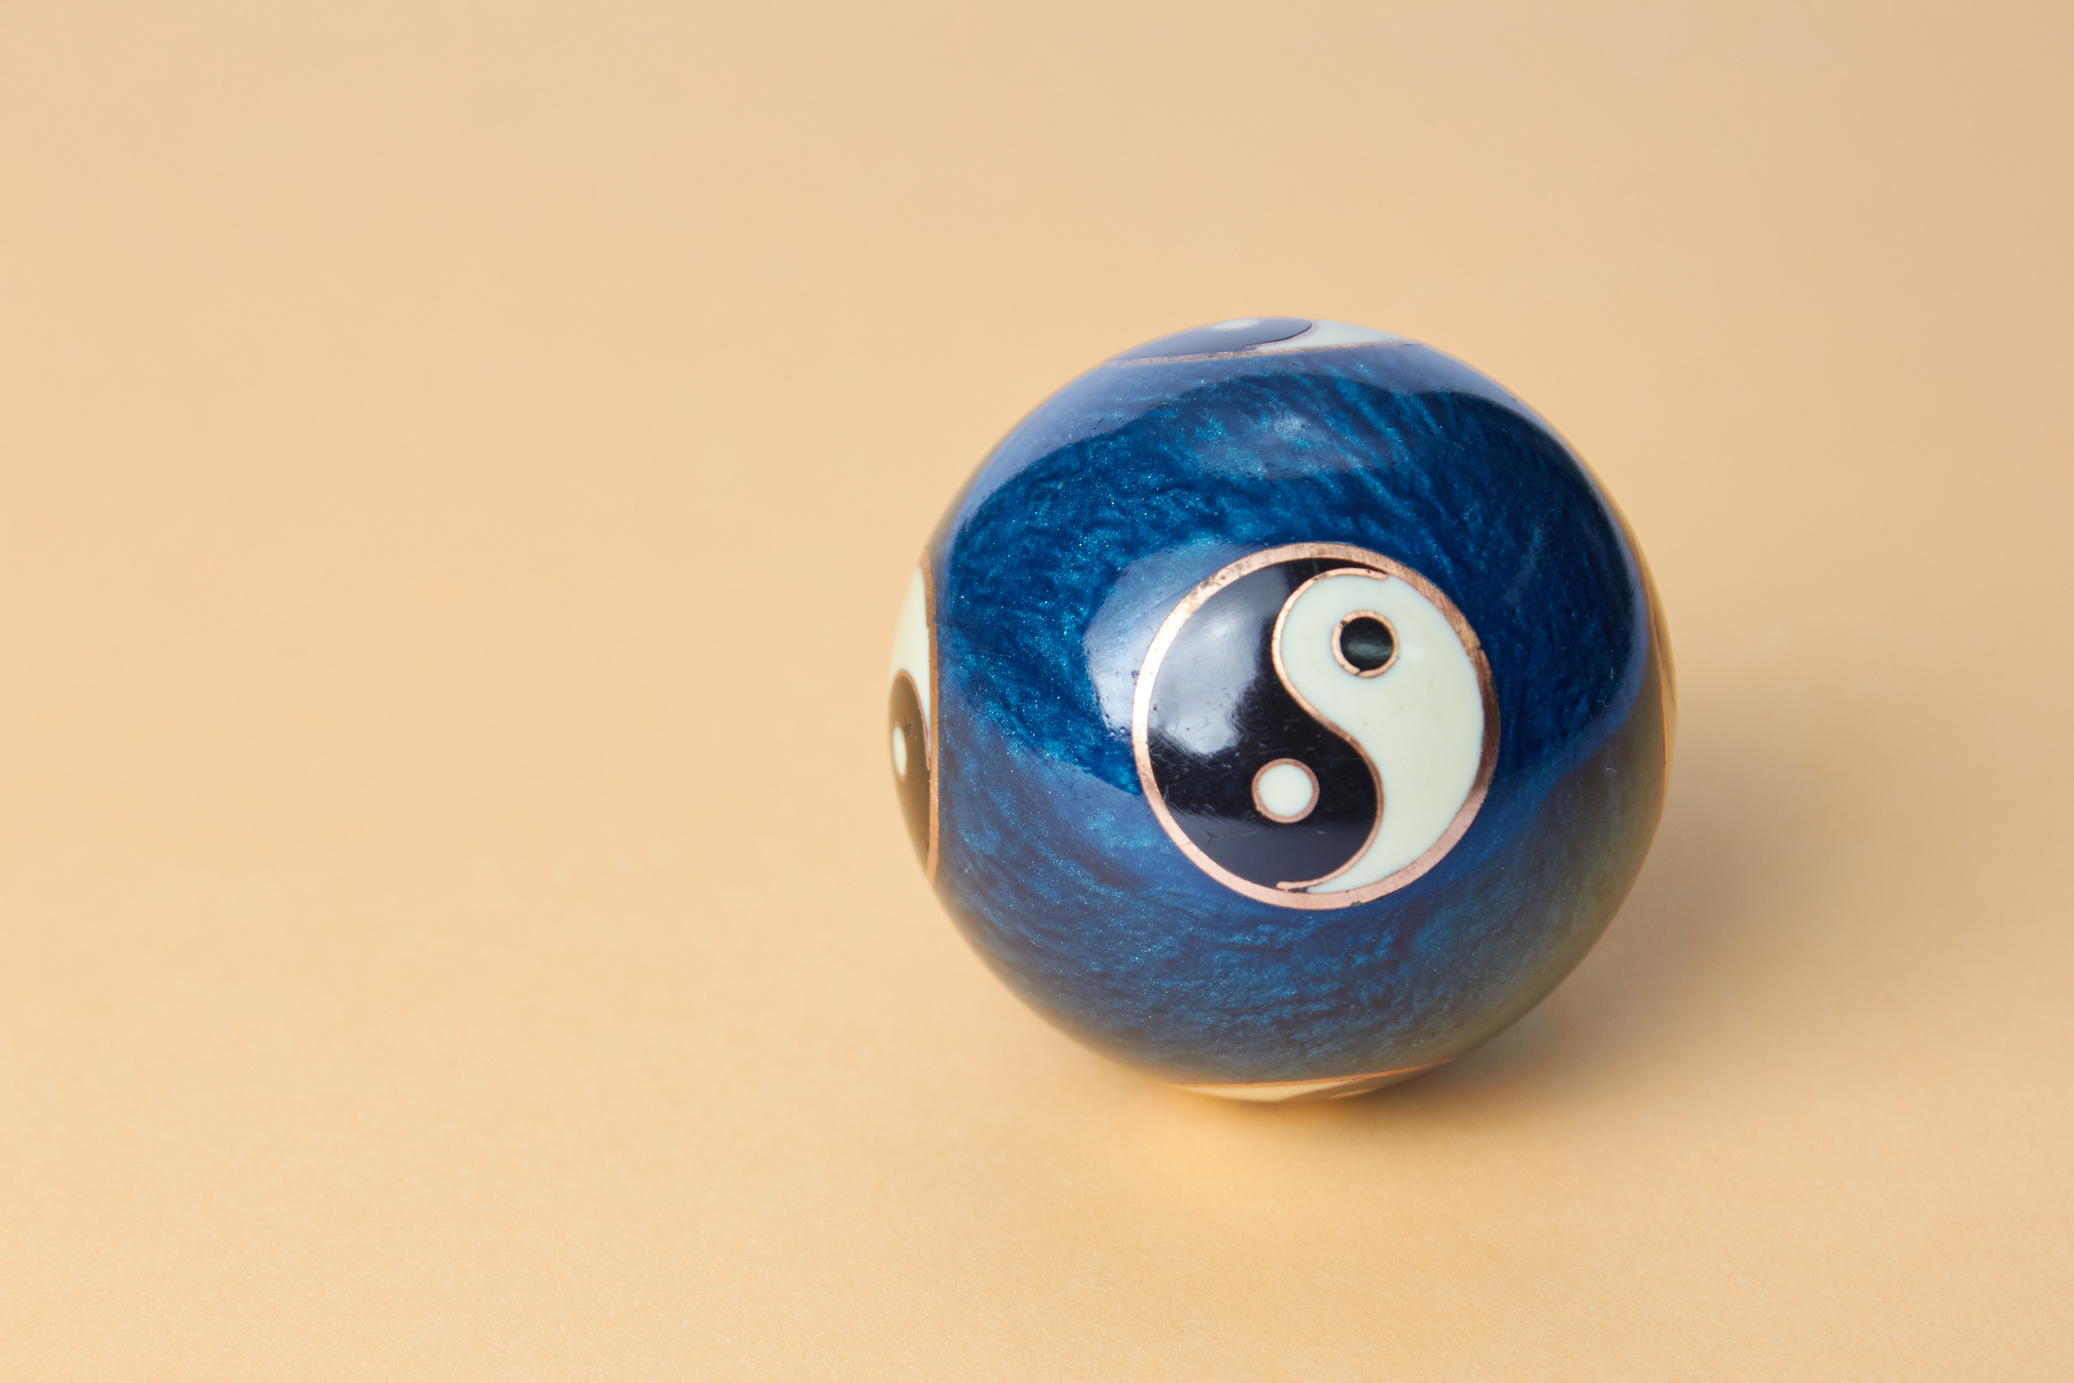 A Chinese ball with the yin-yang symbol